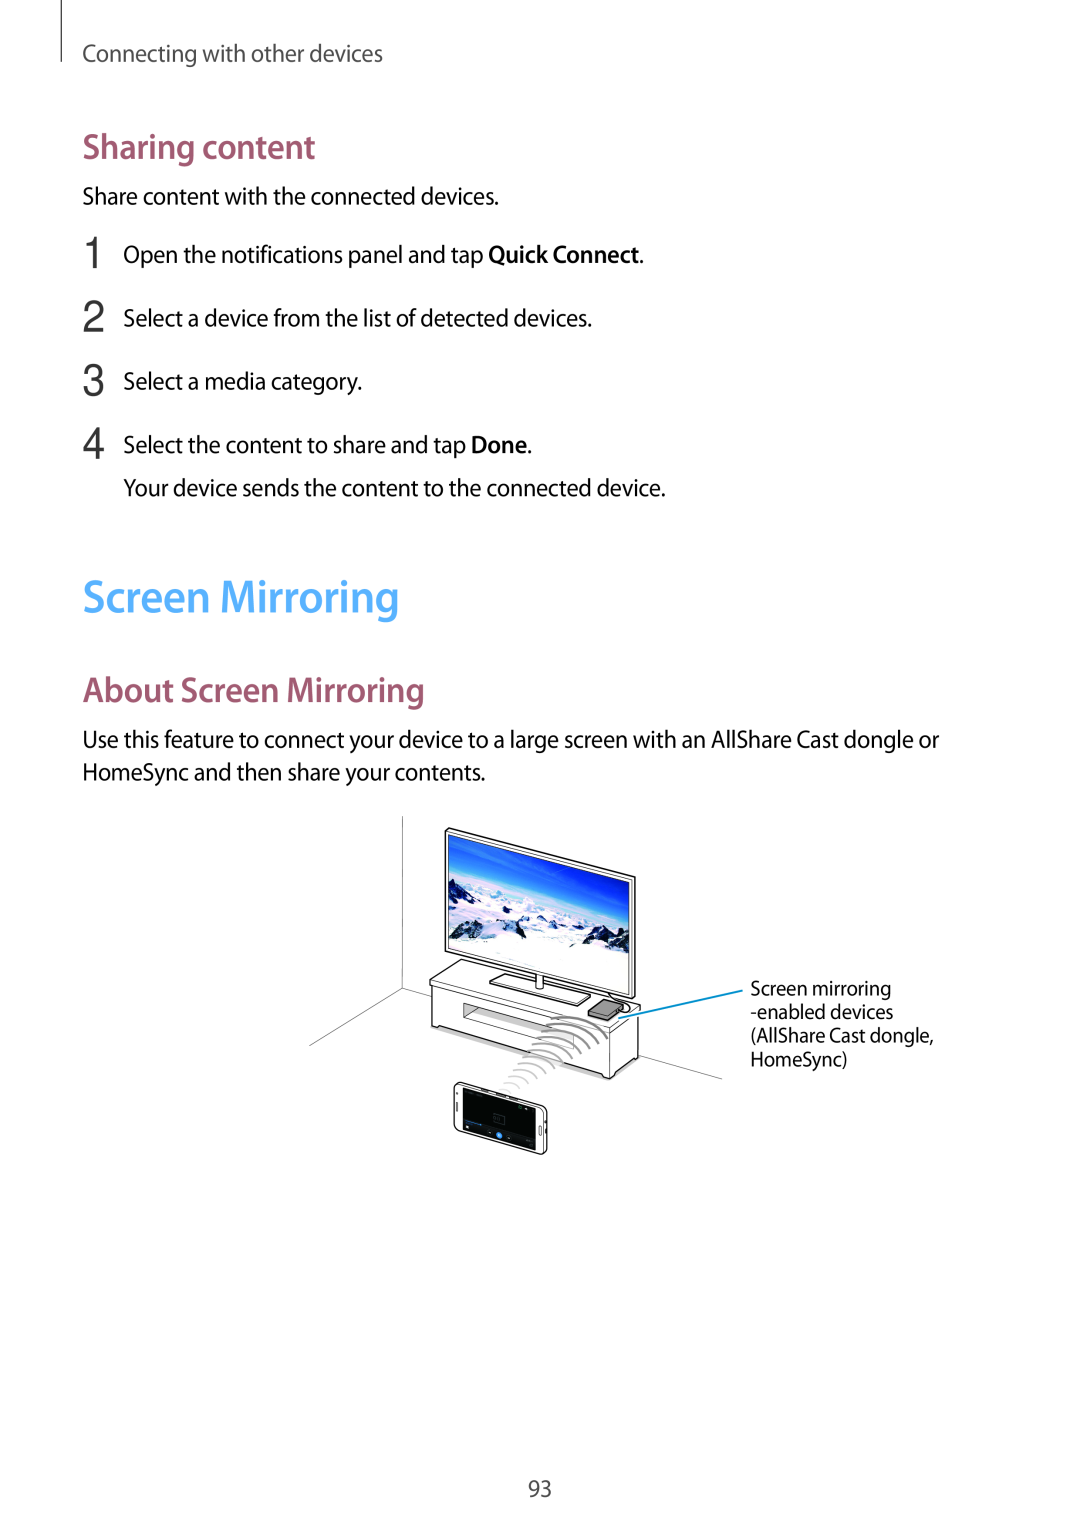 Samsung SM-A300FZWULUX, SM-A300FZDDSEE manual Sharing content, About Screen Mirroring, Connecting with other devices 